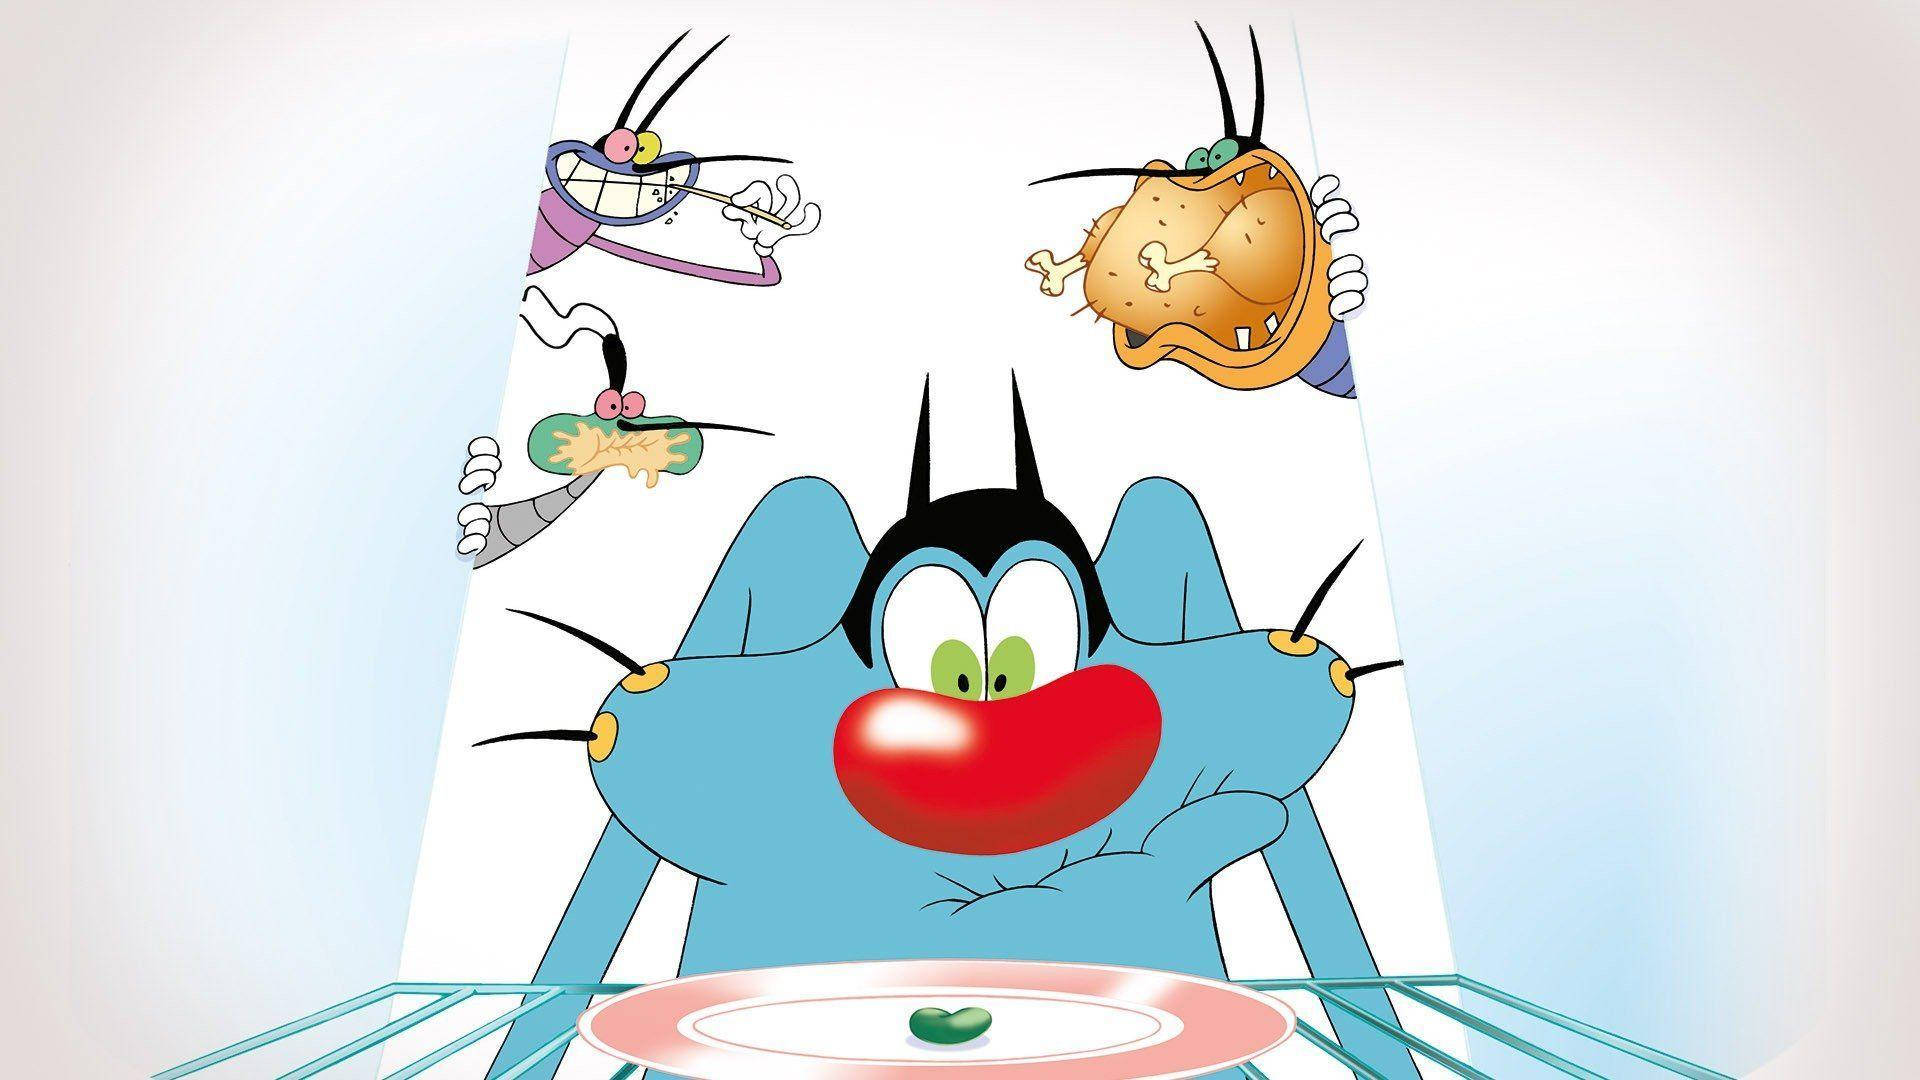 Download Oggy And The Cockroaches No Leftover Wallpaper 